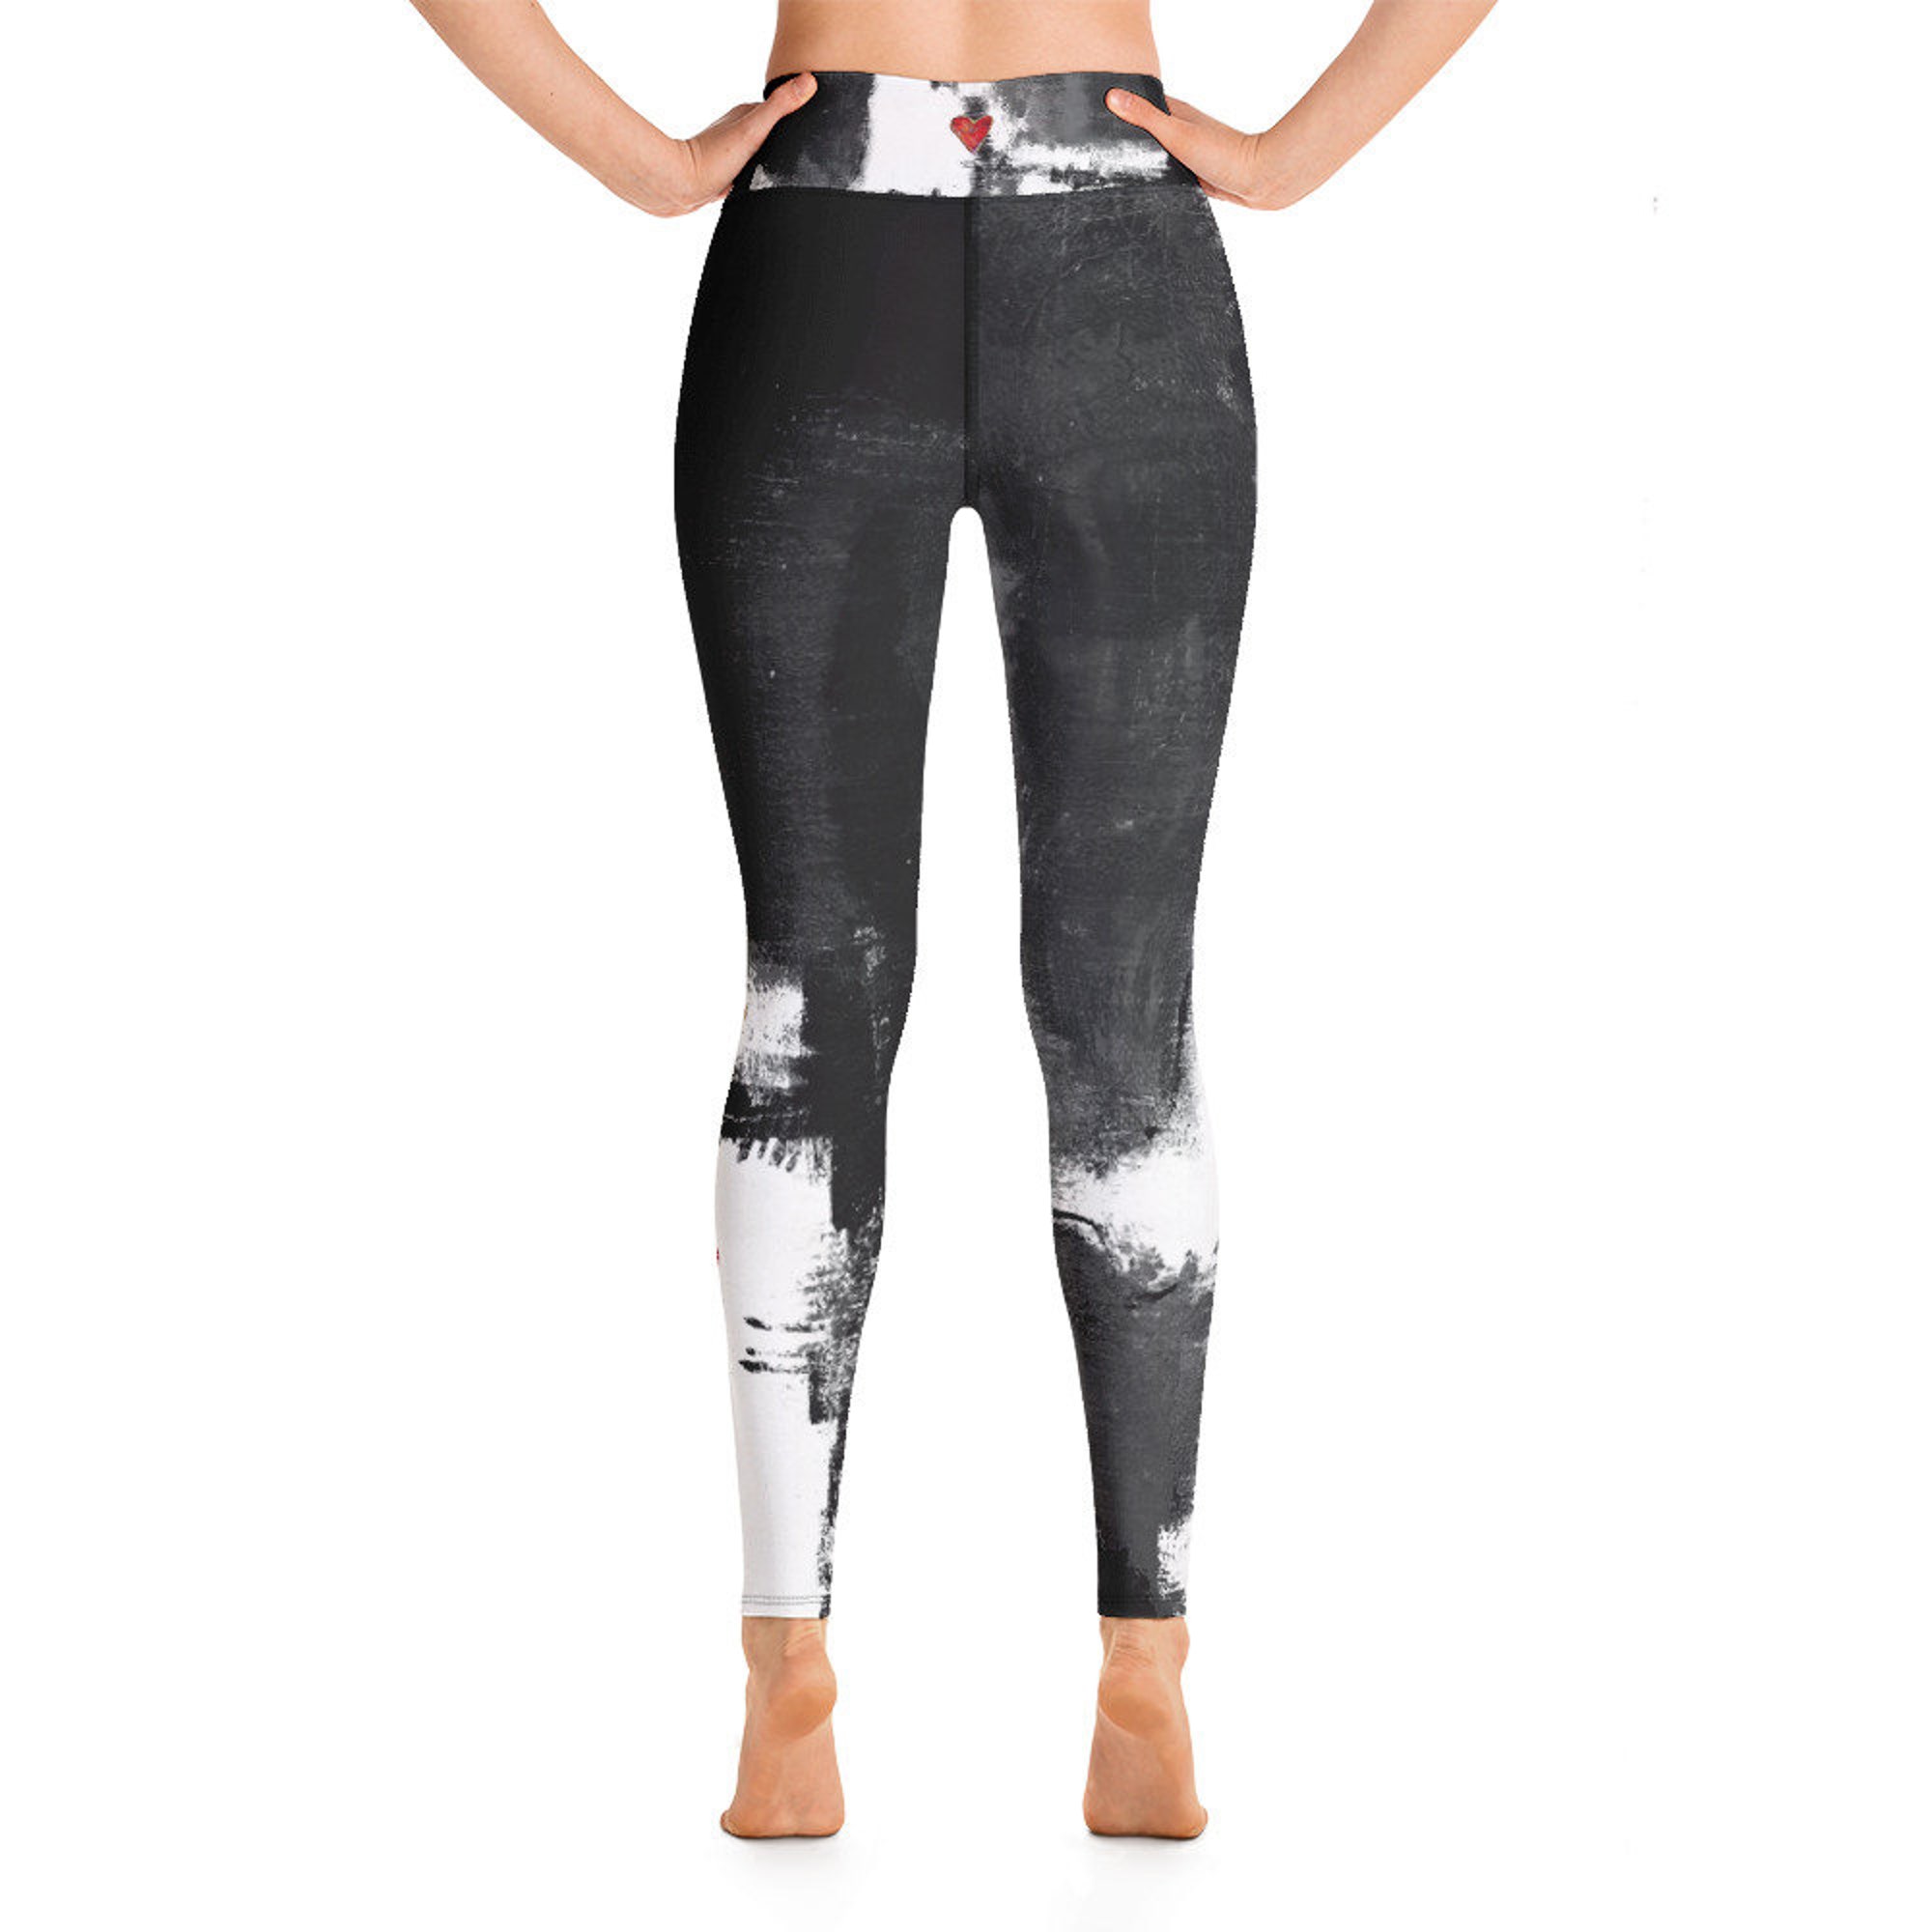 Abstract Woman Black and White with Red Hearts High-Waist Leggings